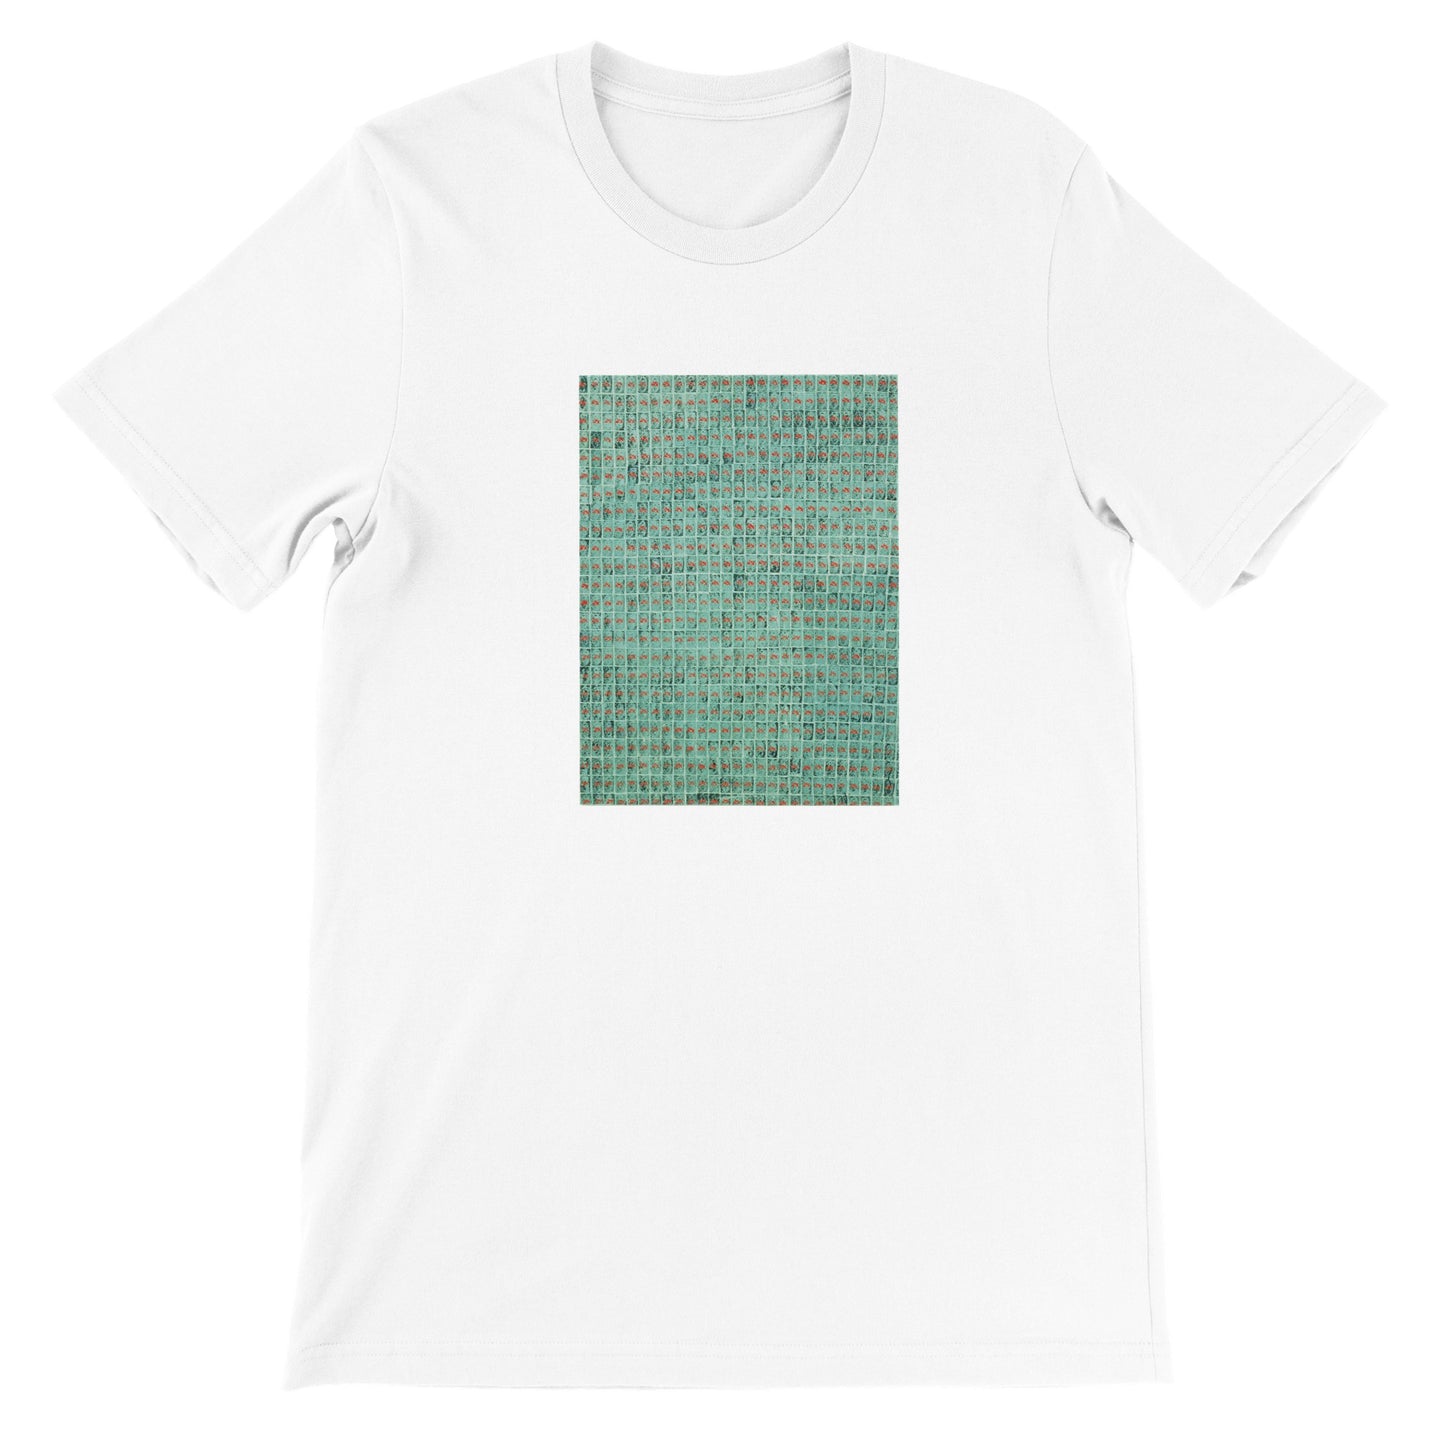 ANDY WARHOL - GREEN STAMPS - PREMIUM UNISEX T-SHIRT